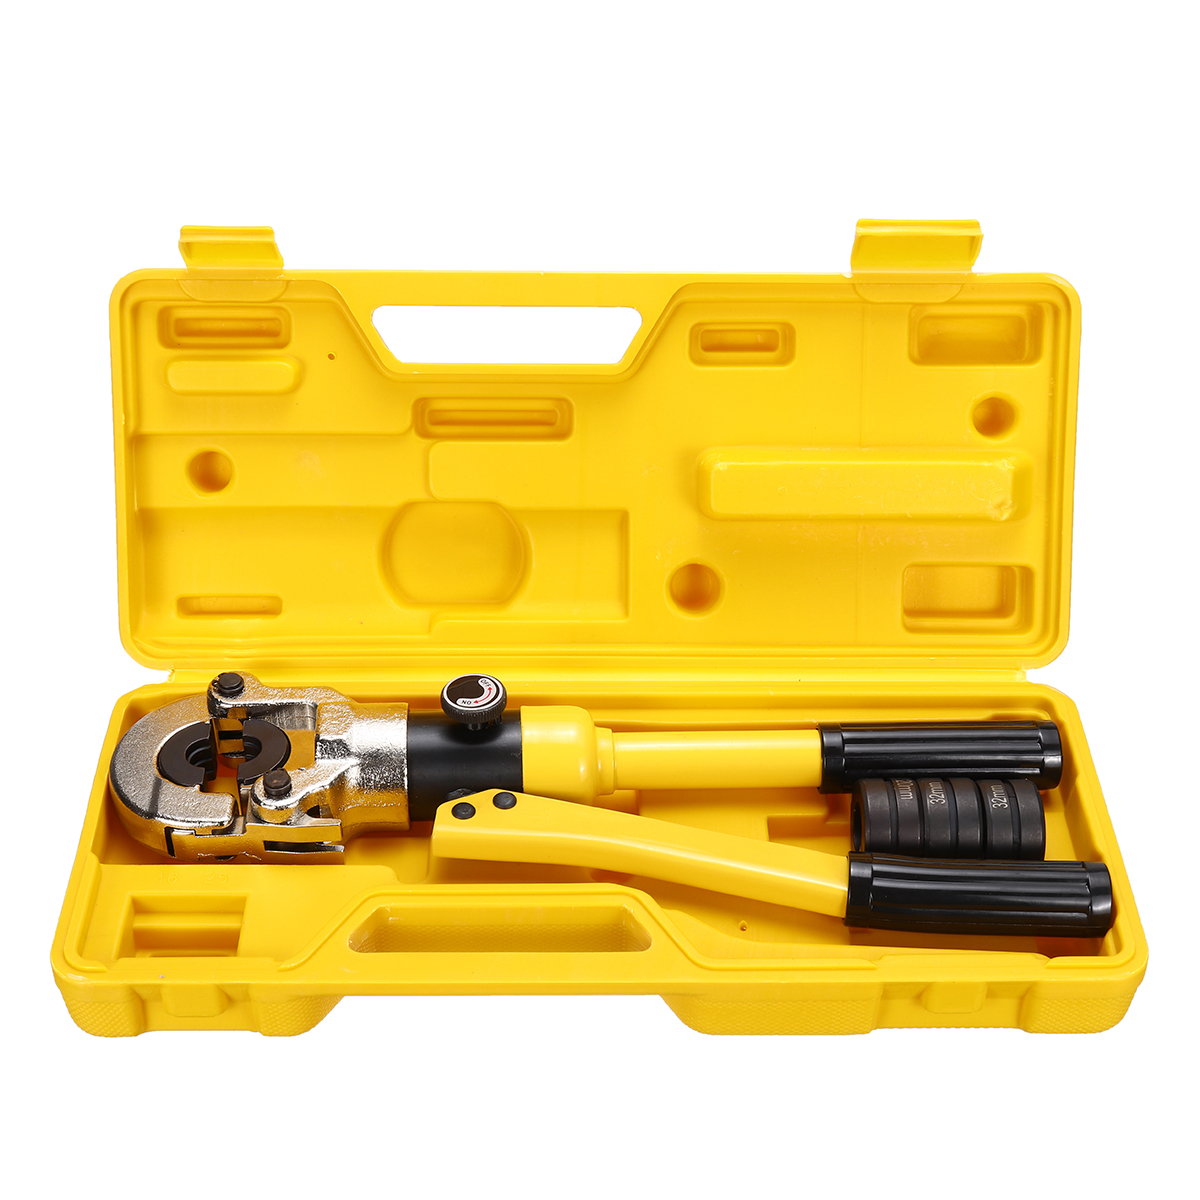 Find 16 32mm Pressure Pipe Wrench Plumbing Pipe Press Clamp Tool 10T Crimping Force Stainless Steel Hand Tools for Sale on Gipsybee.com with cryptocurrencies